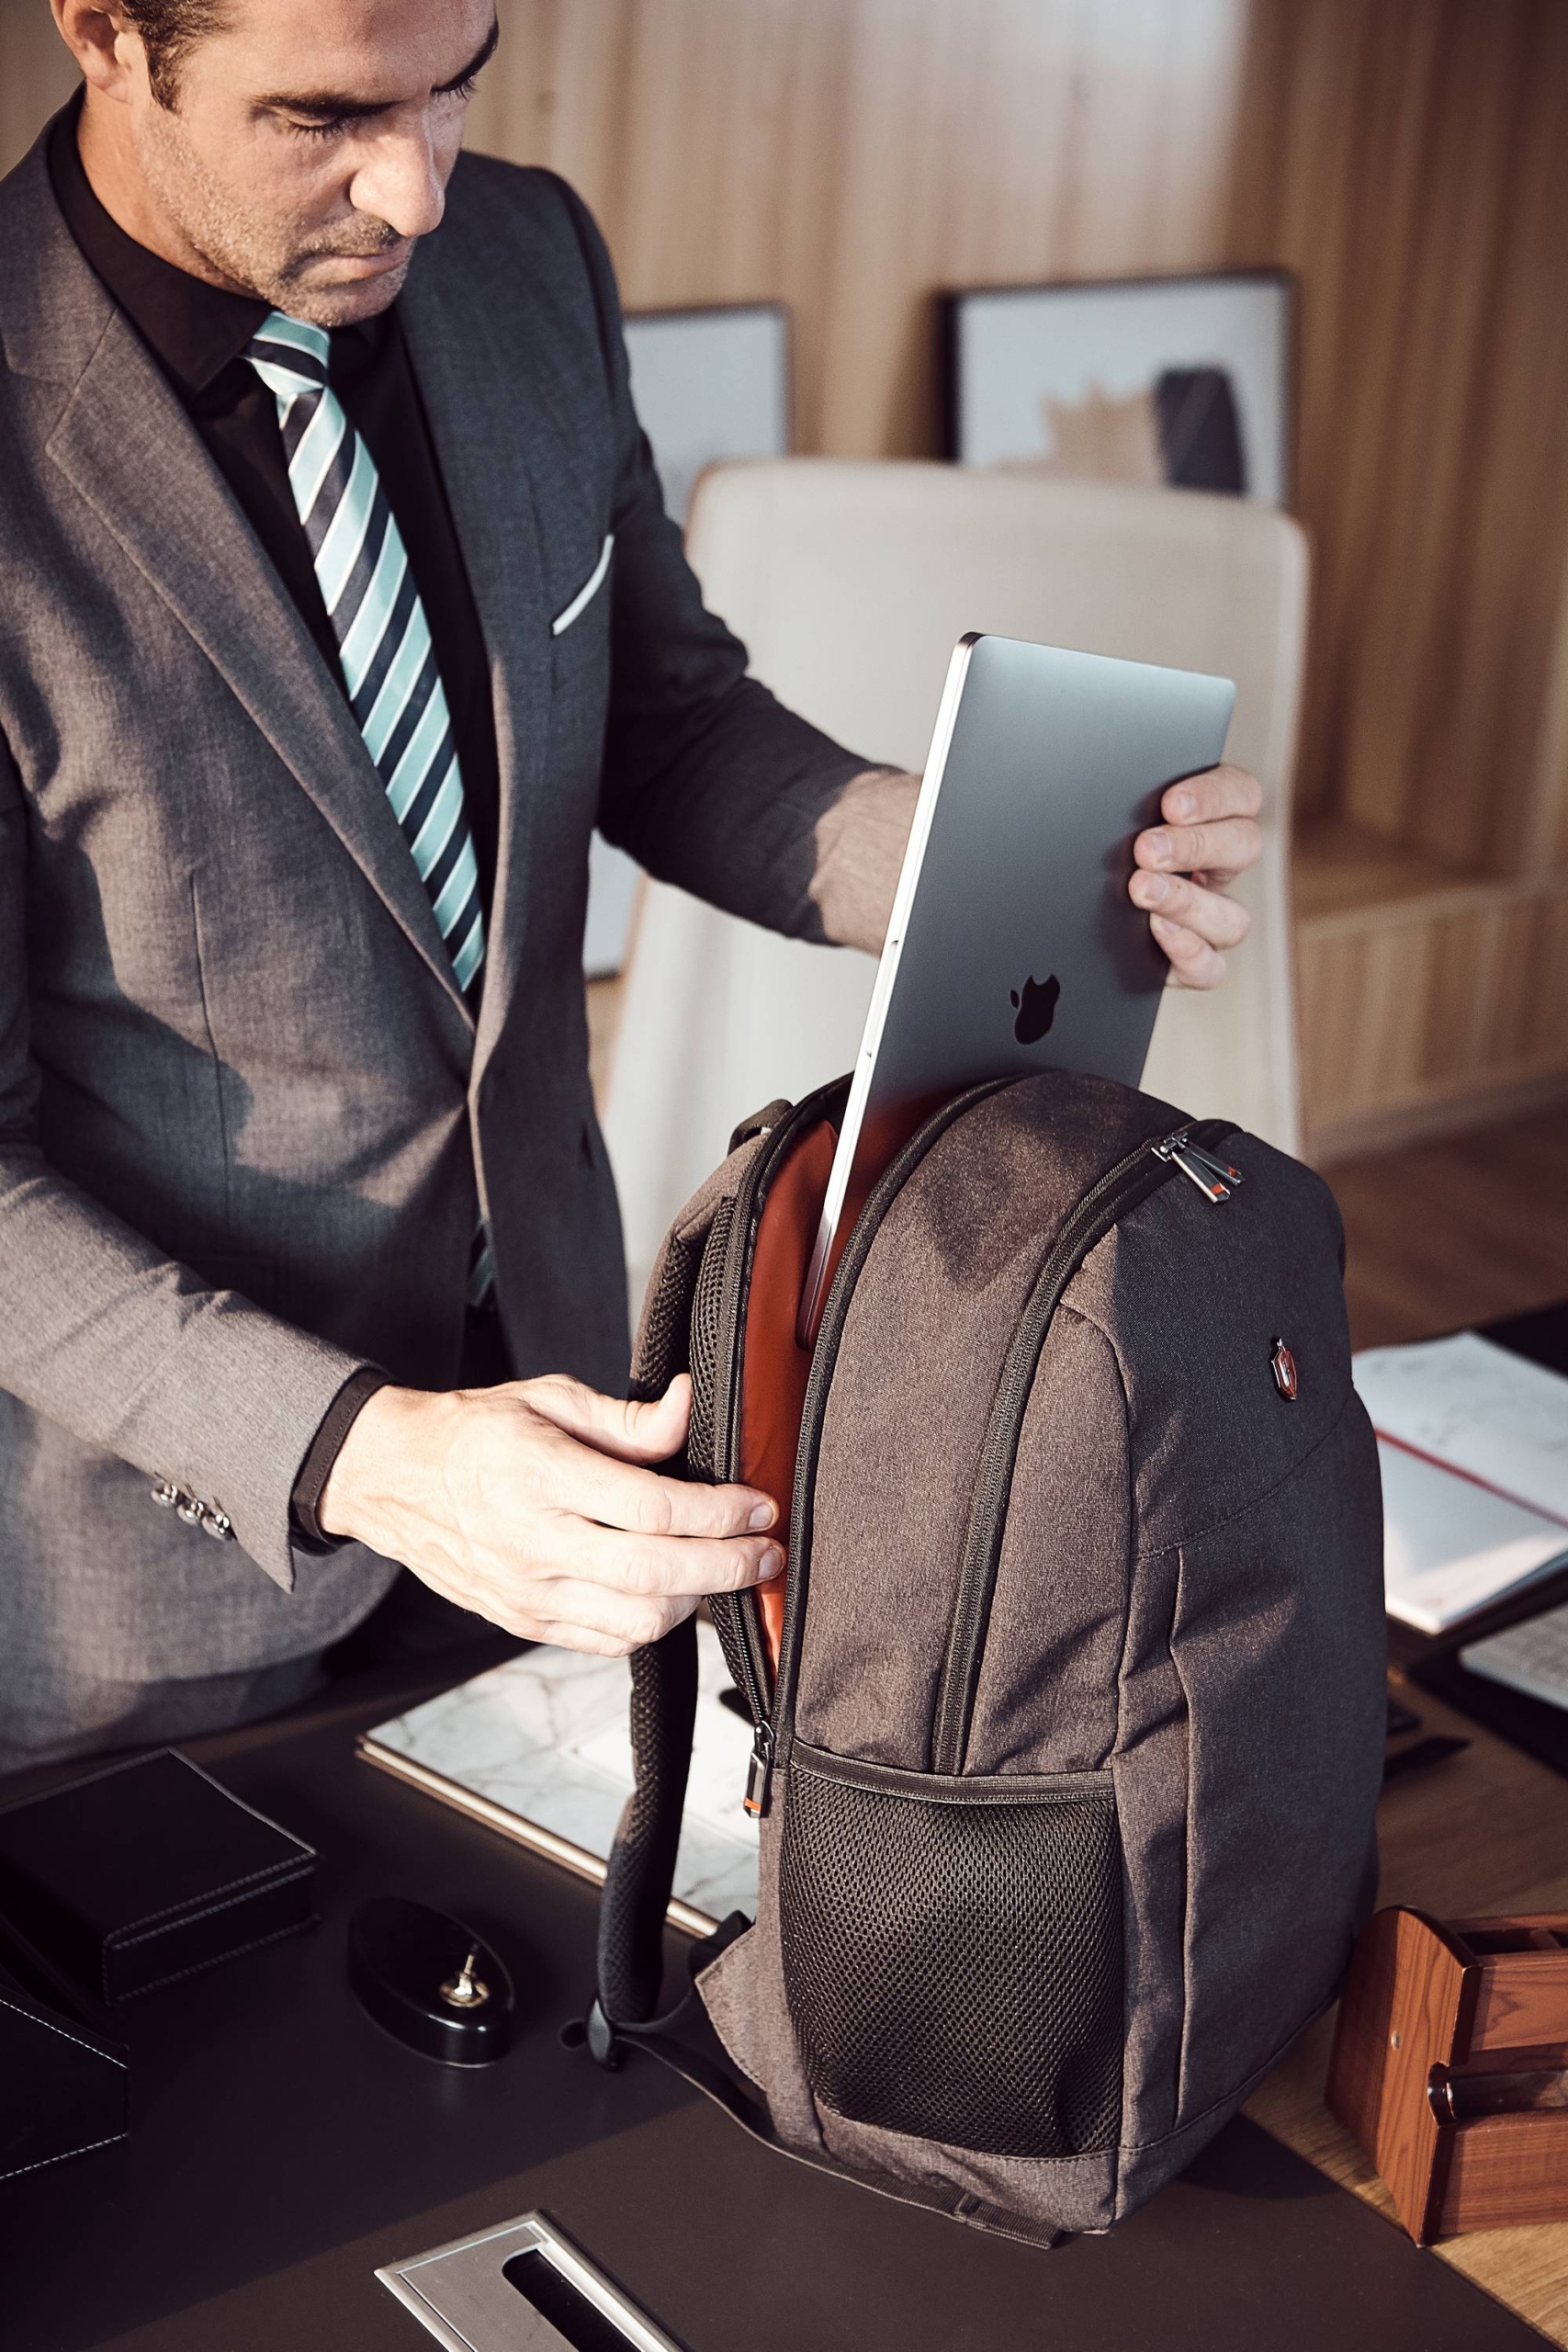 Best laptop bags for Windows 10 laptops to buy